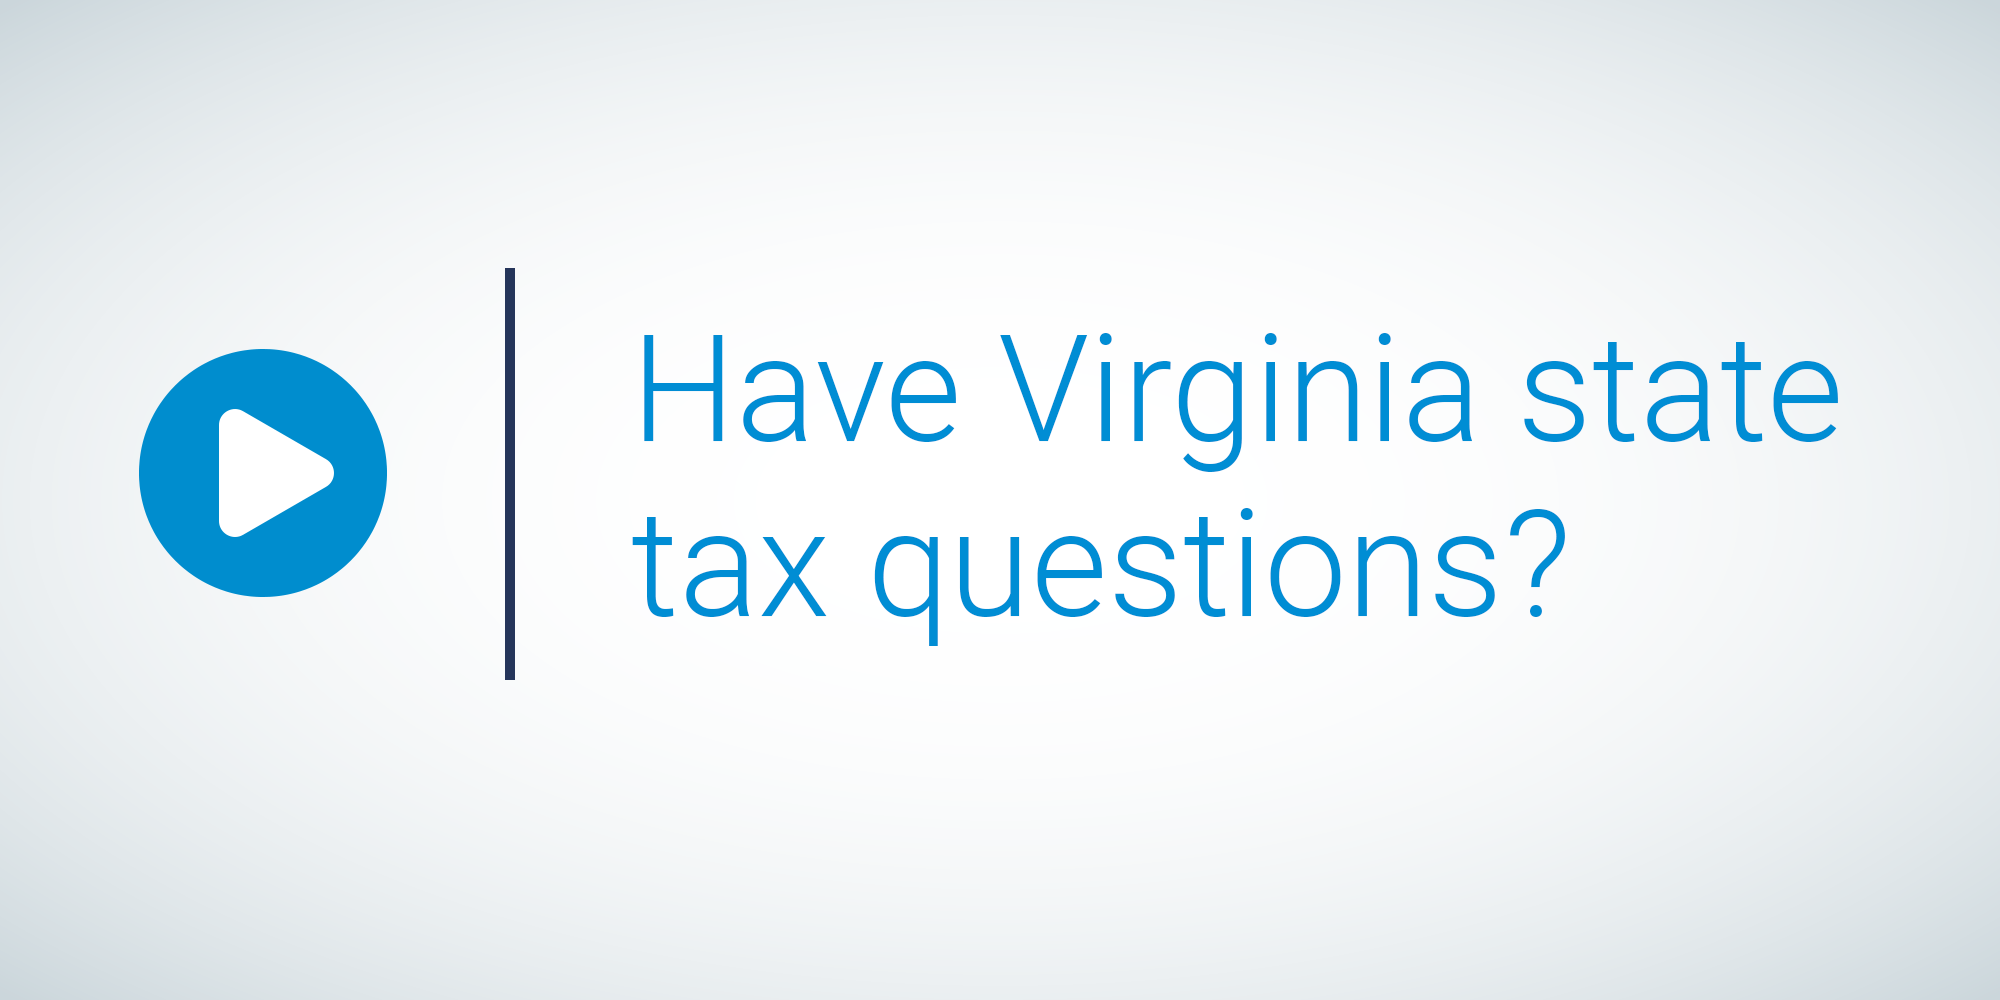 Tax questions news card image